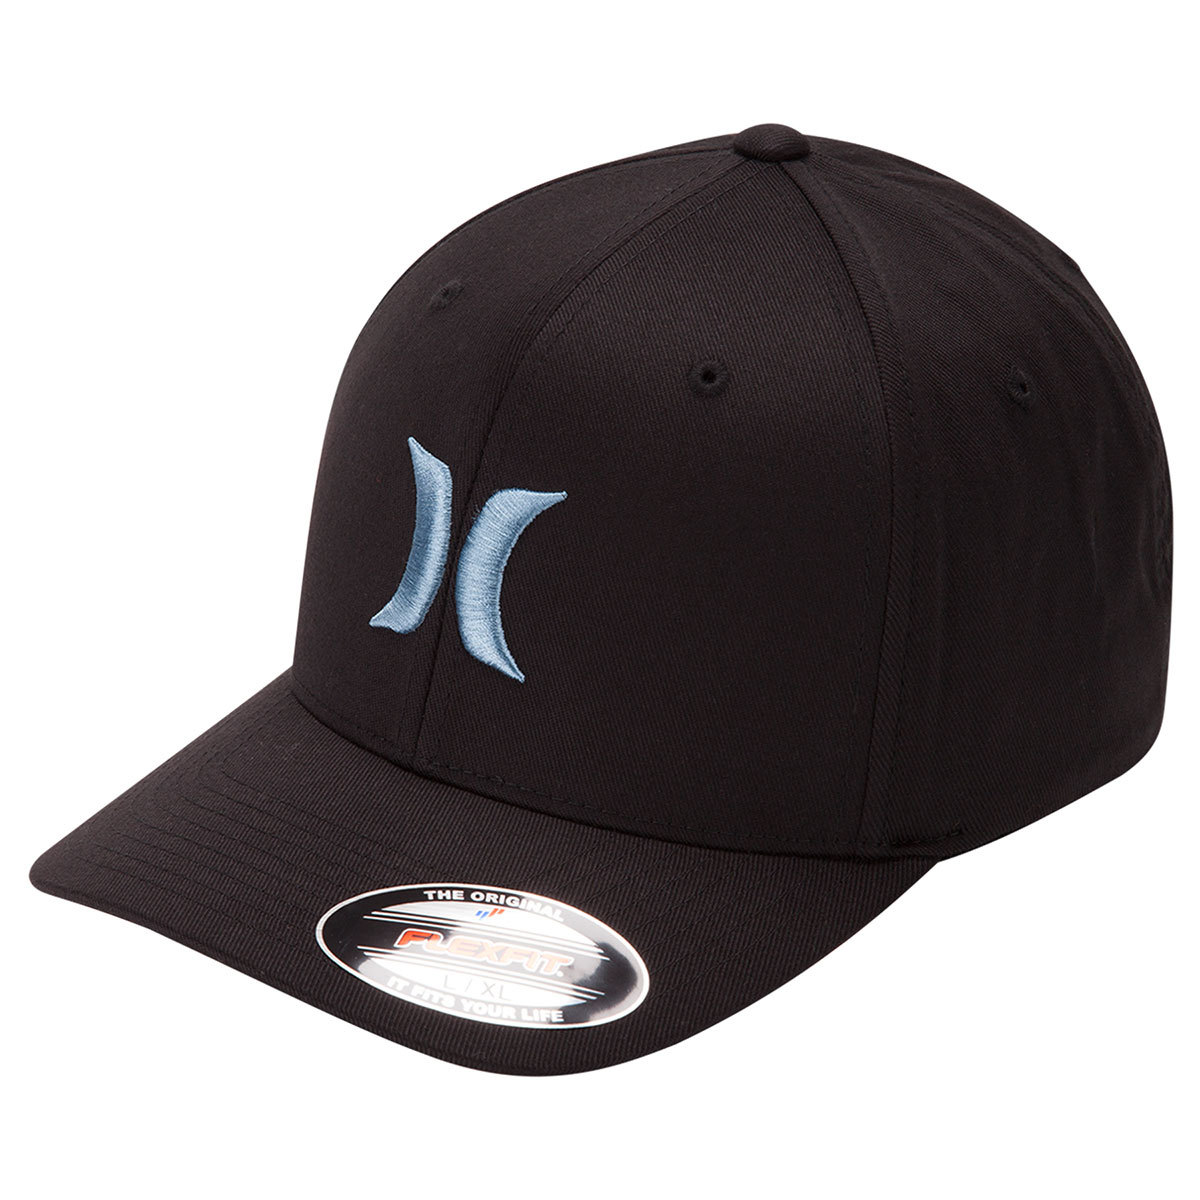 Hurley Guys' One And Only Hat - Black, L/XL